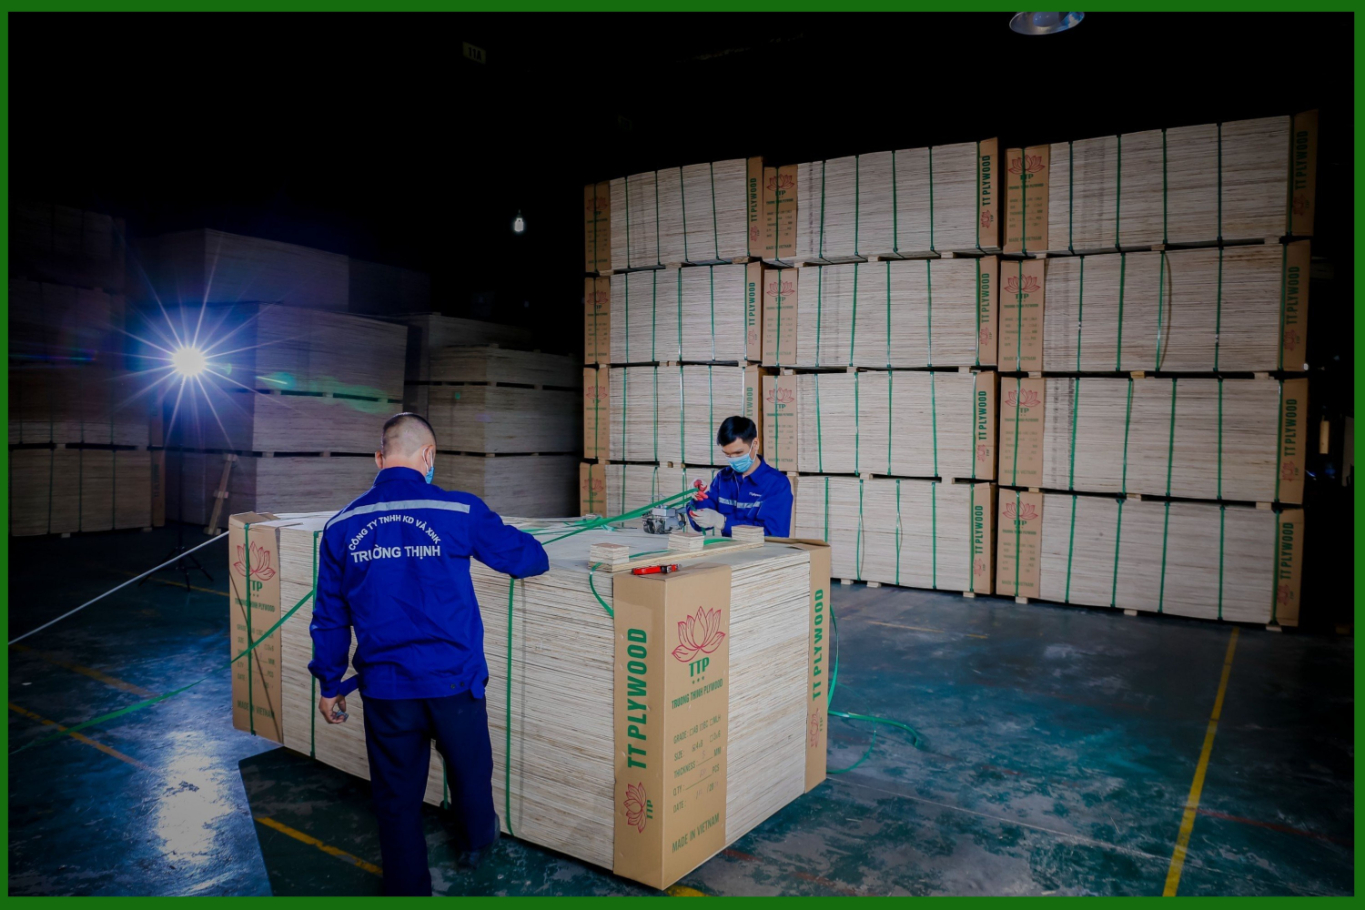 THE ORDERS OF COMMERCIAL PLYWOOD TO THAILAND